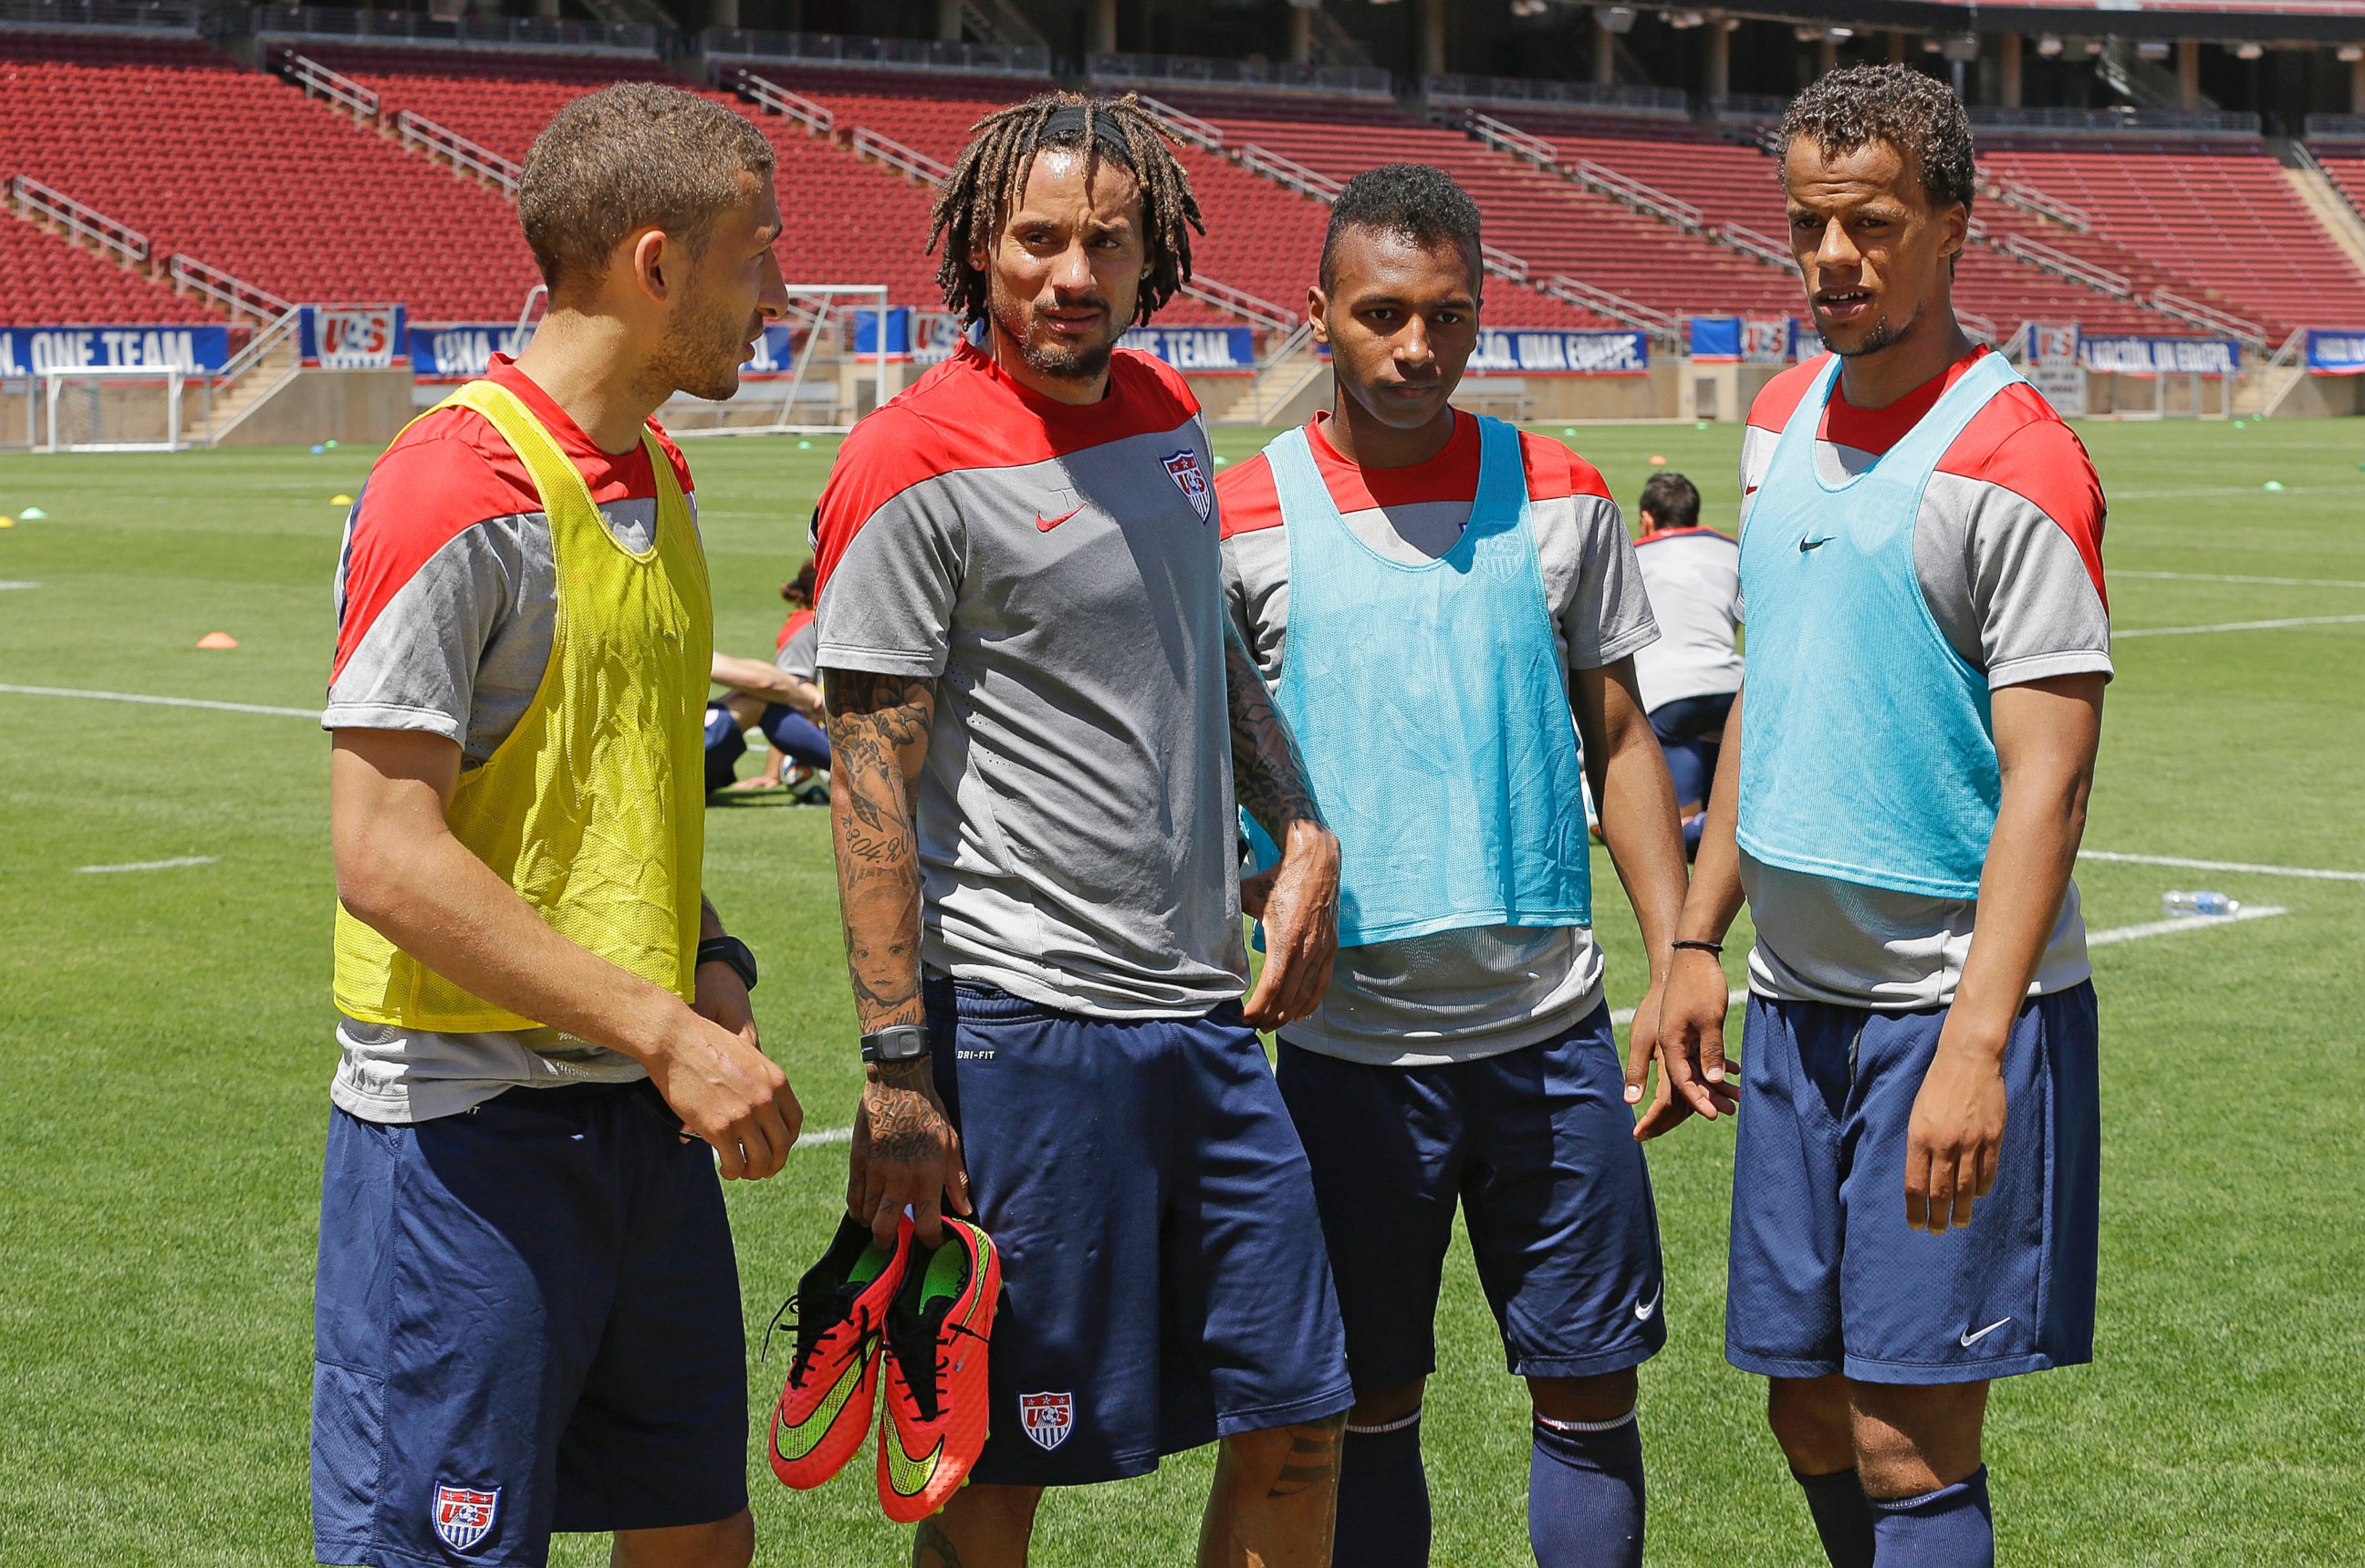 PHOTO: German-American players on the U.S. World Cup team, Fabian Johnson, Jermaine Jones, Julian Green, and Timothy Chandler meet after a practice in Stanford, Calif. on May 22, 2014.